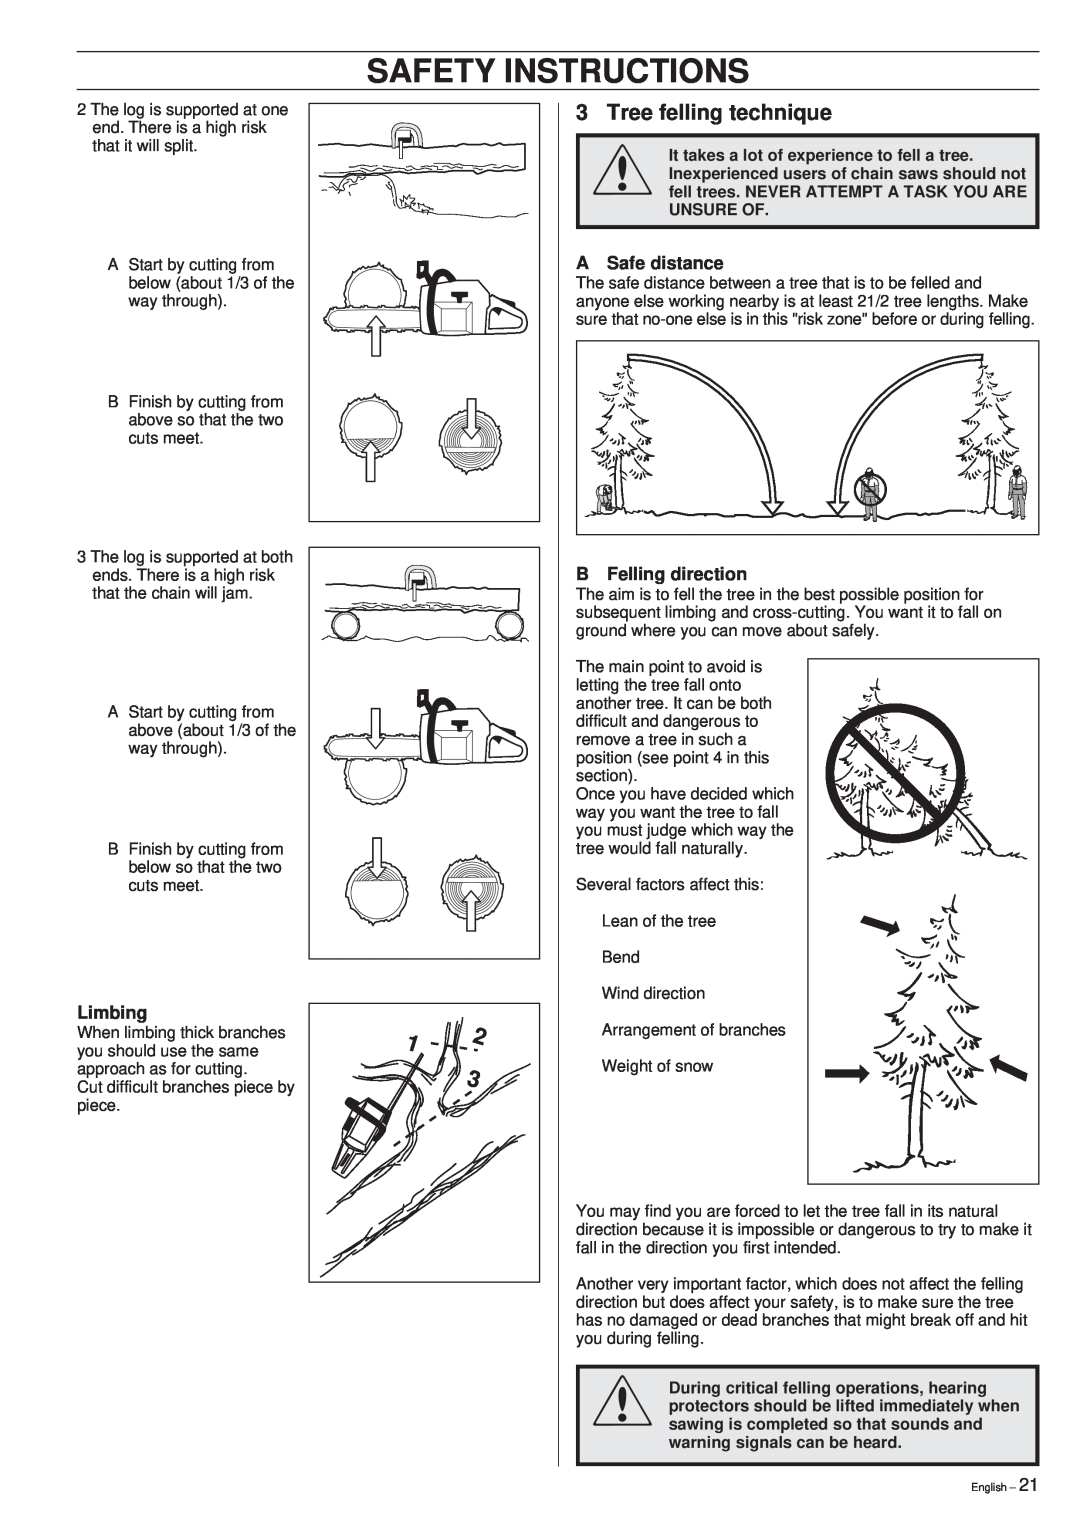 Husqvarna 261 manual Safety Instructions, Tree felling technique, A Safe distance, Limbing, B Felling direction 